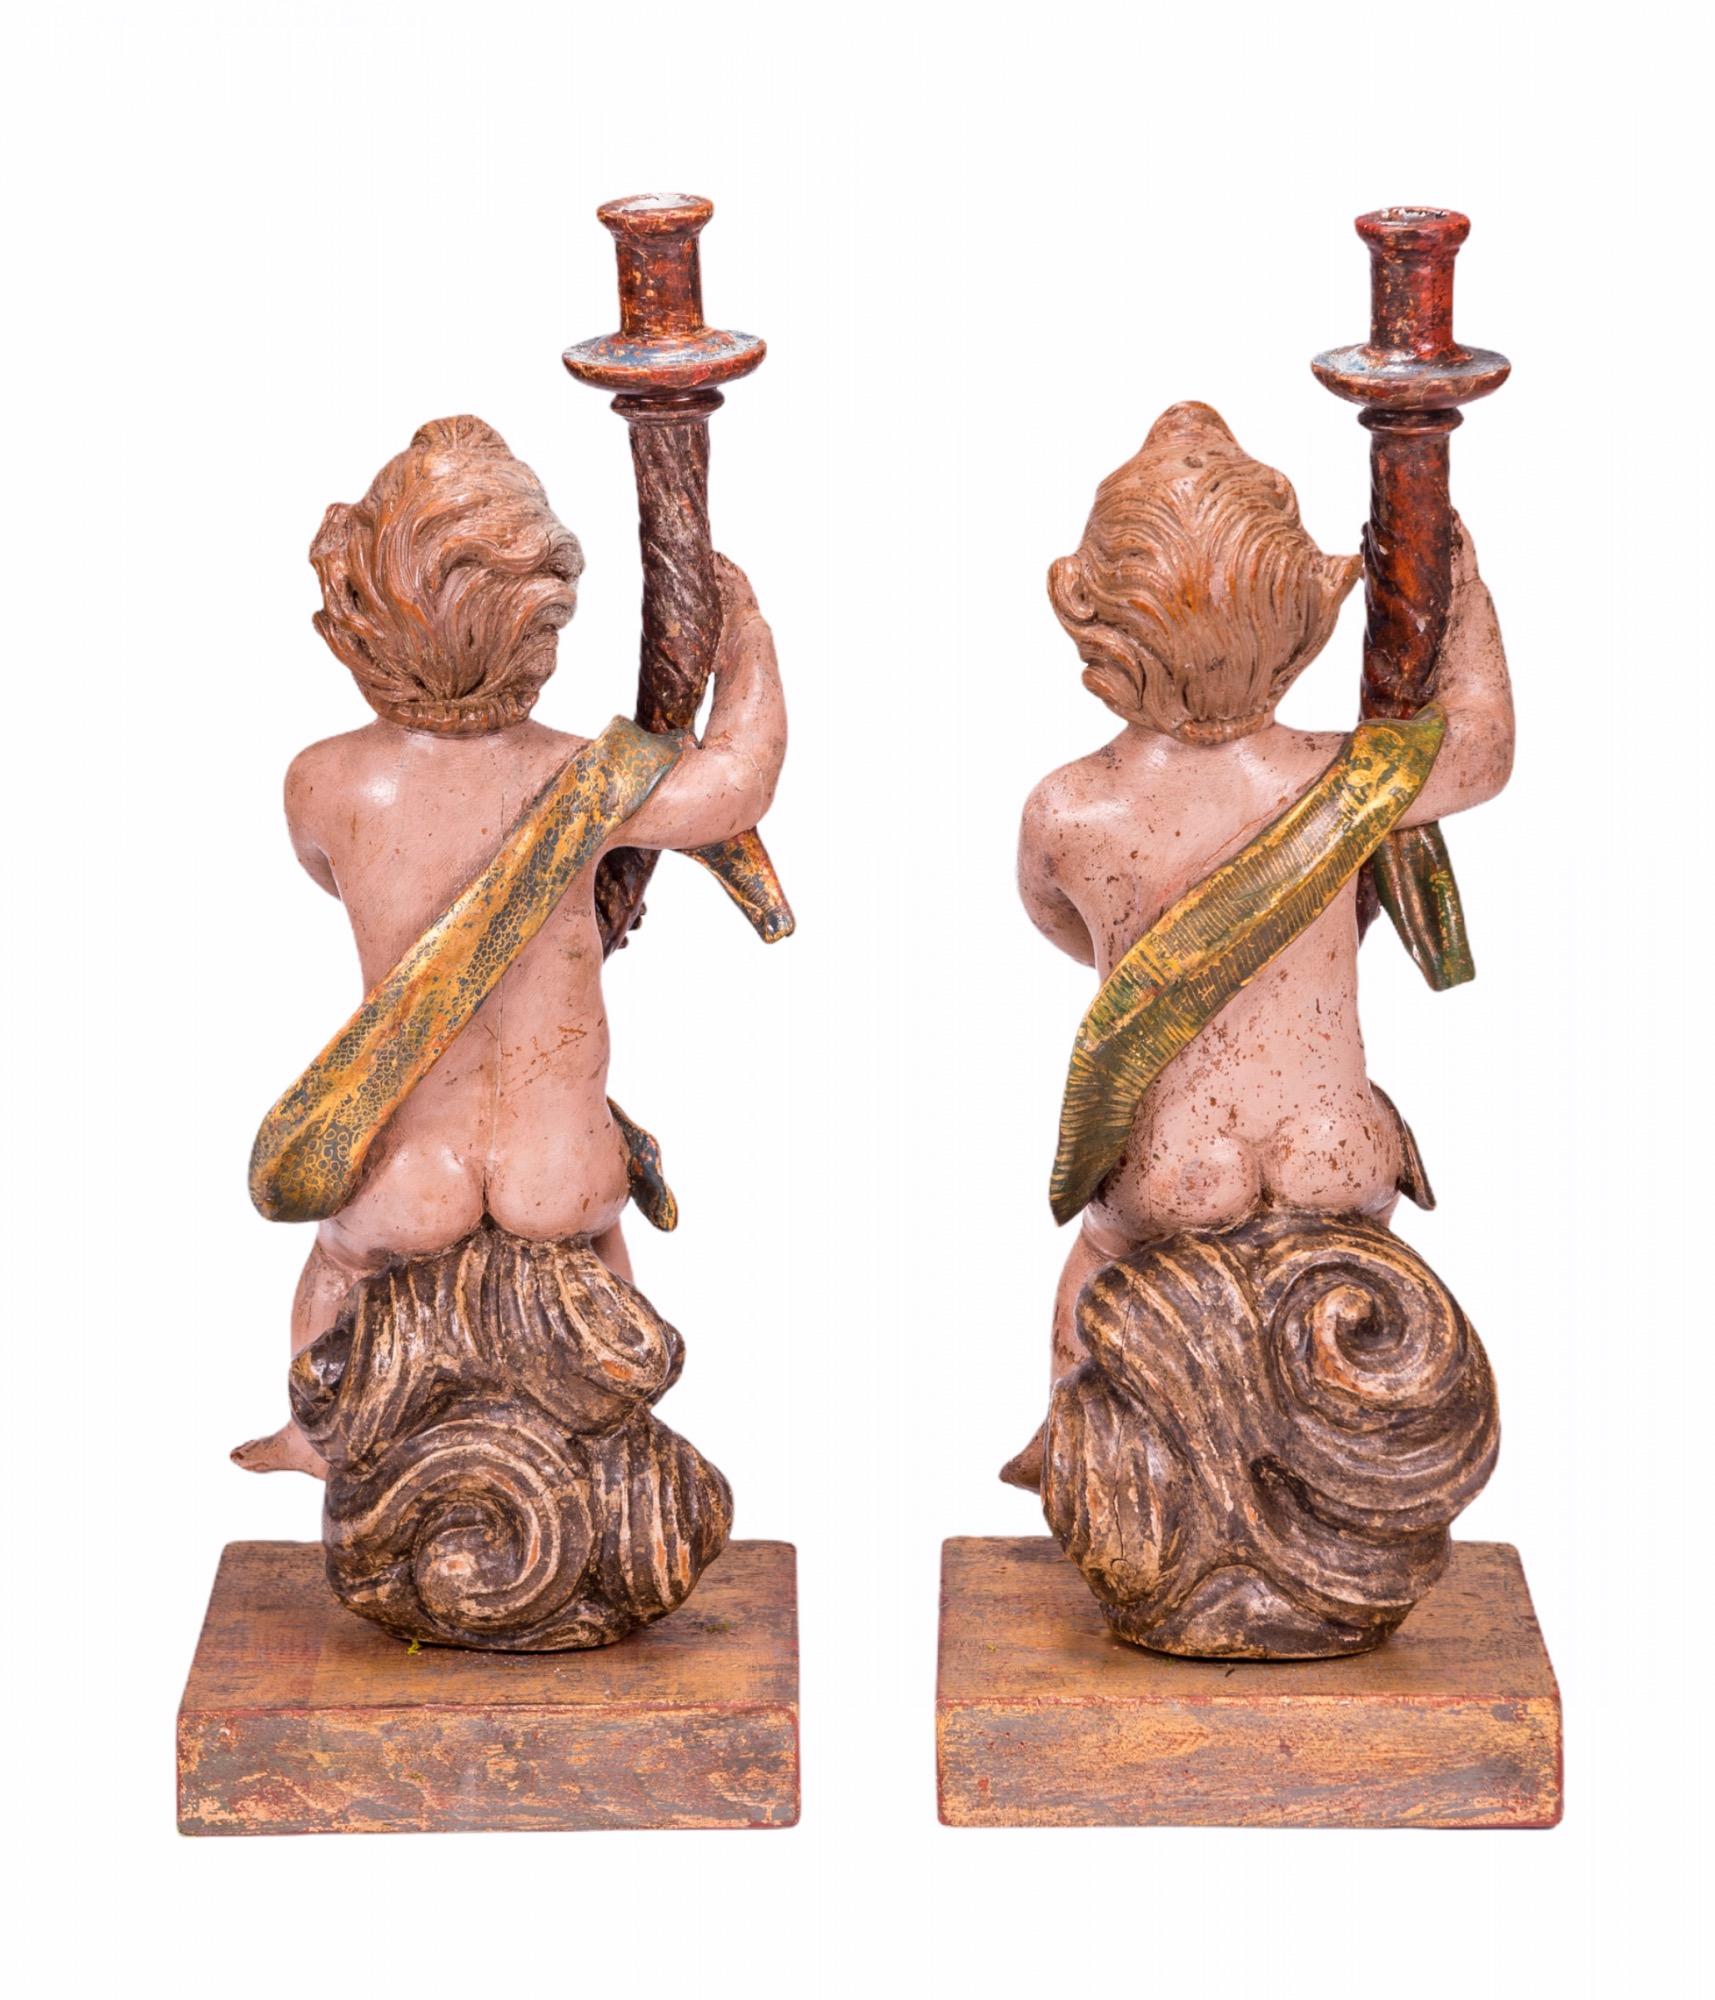 Baroque Angel Sculptures with Torch Shaped Candleholders, 17th Century